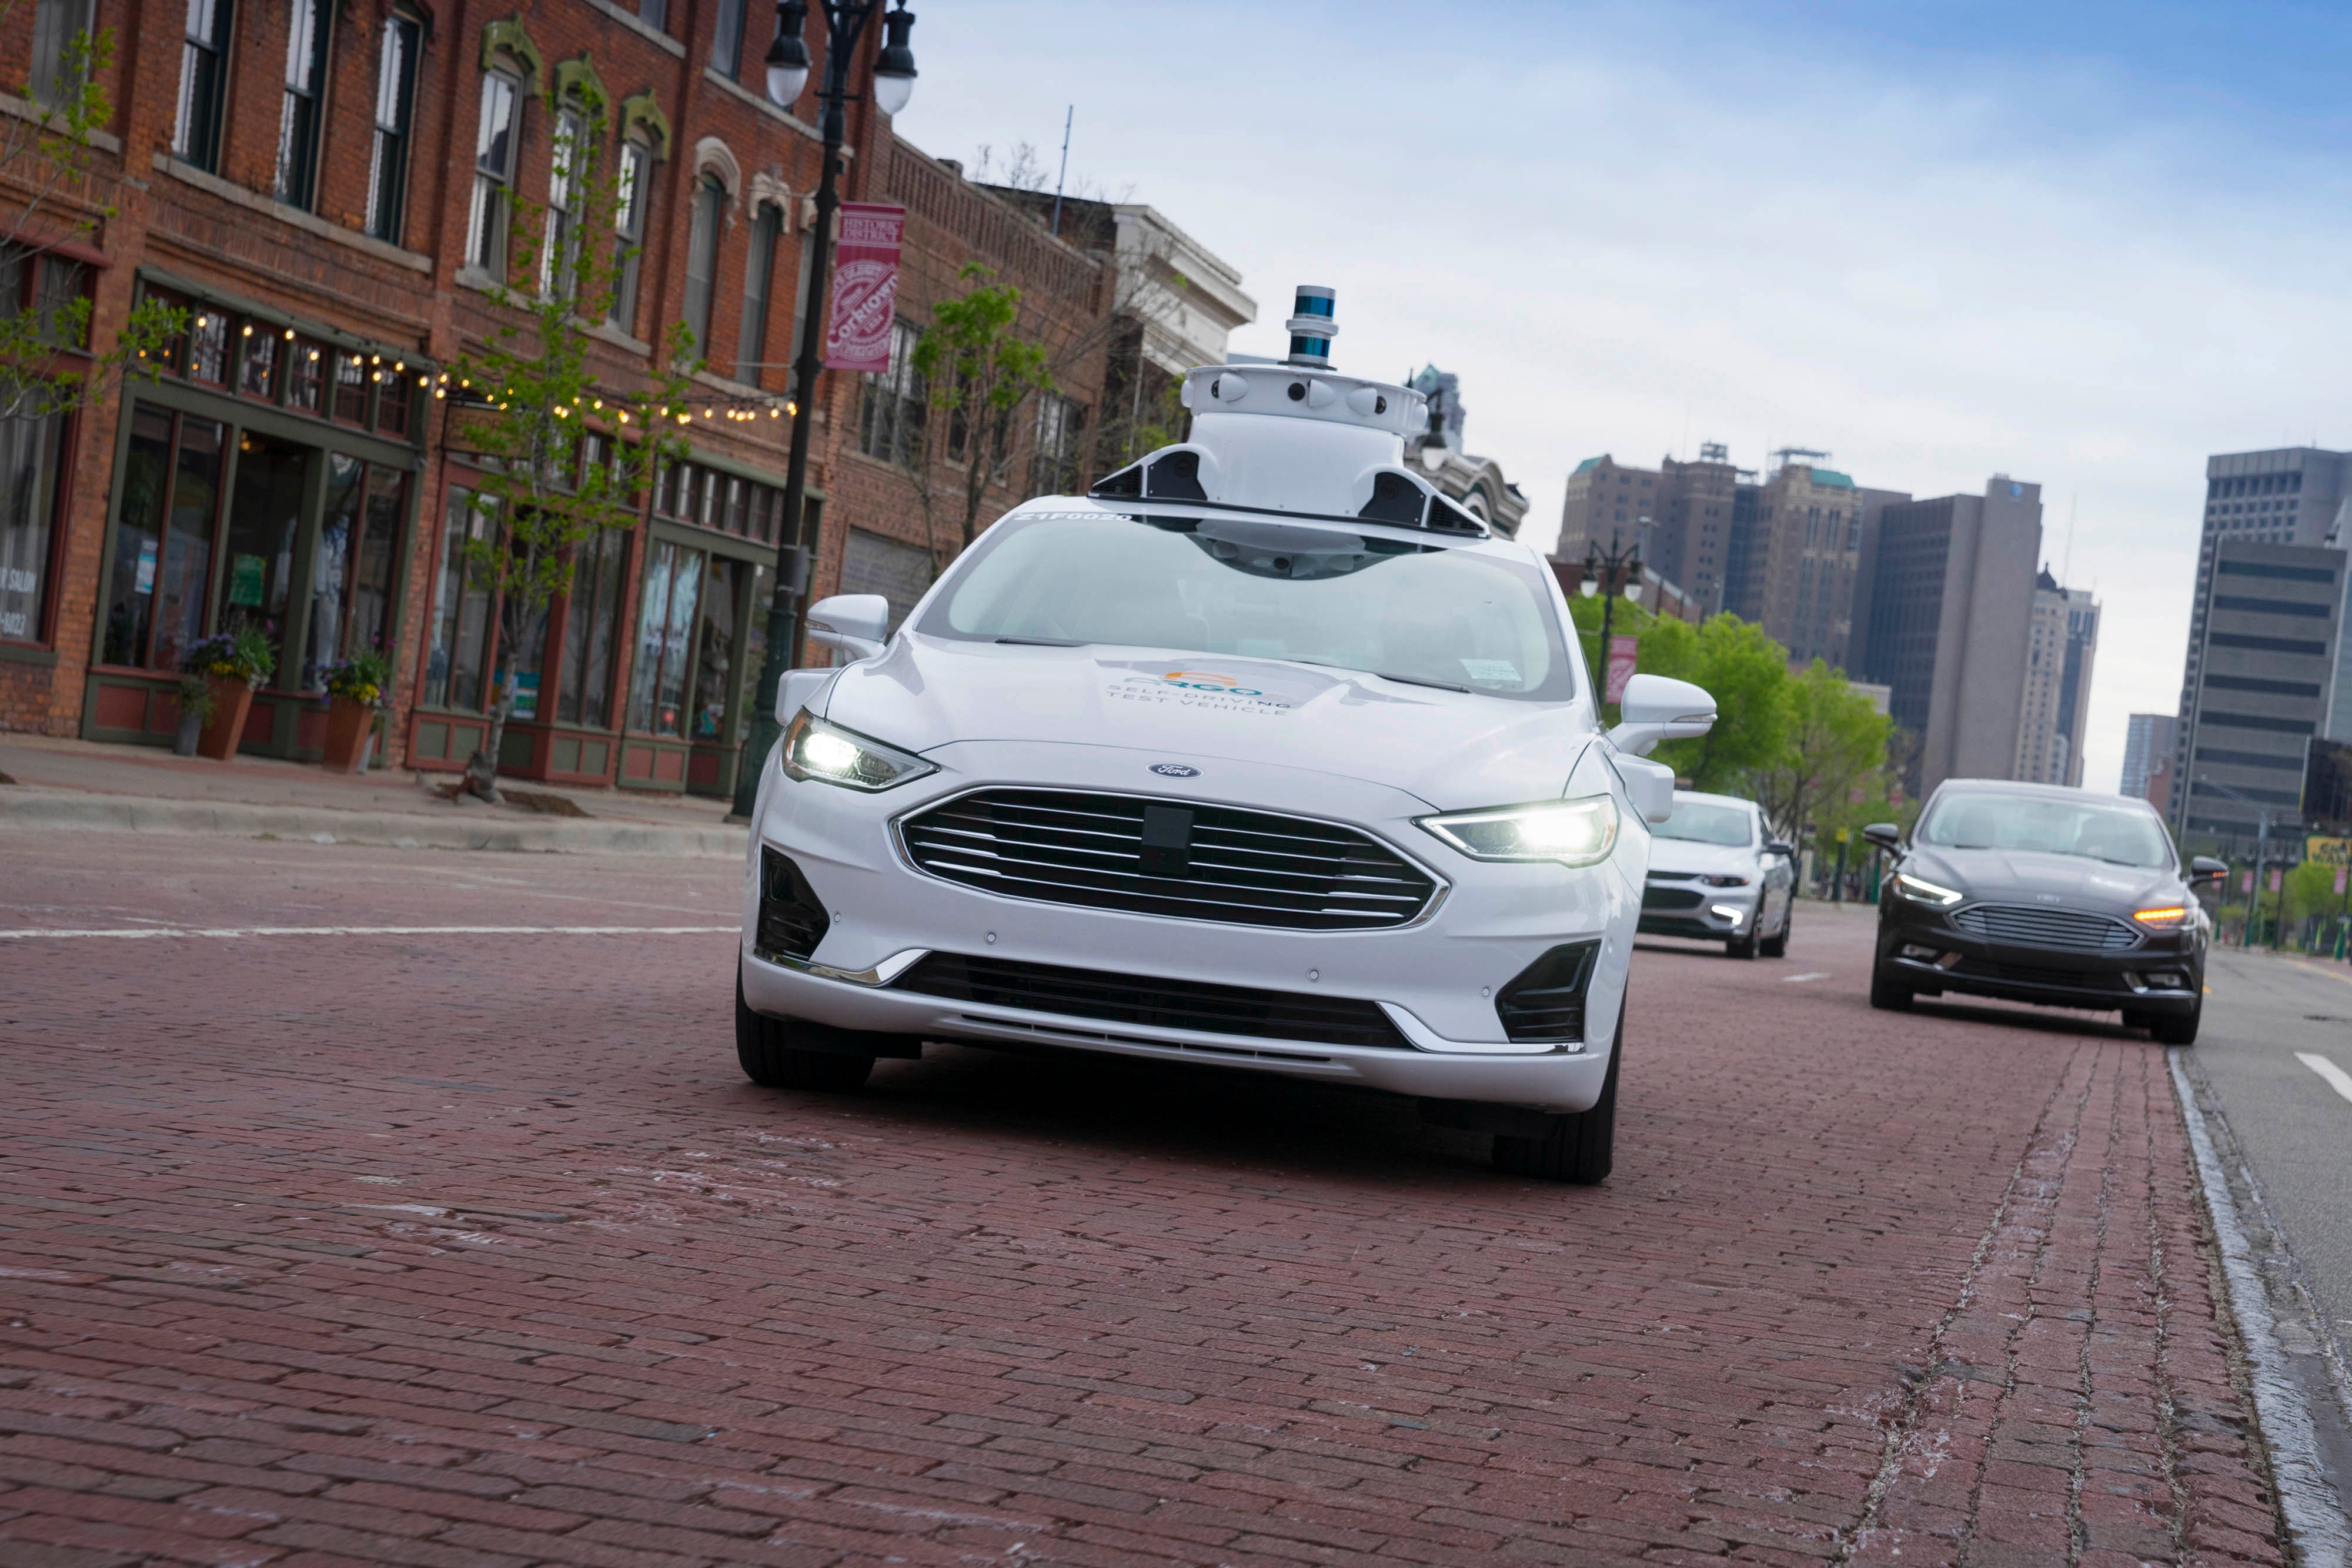 Journey Holding Corp. and Quantum Signal AI will boost Ford's bets on autonomy and new transportation